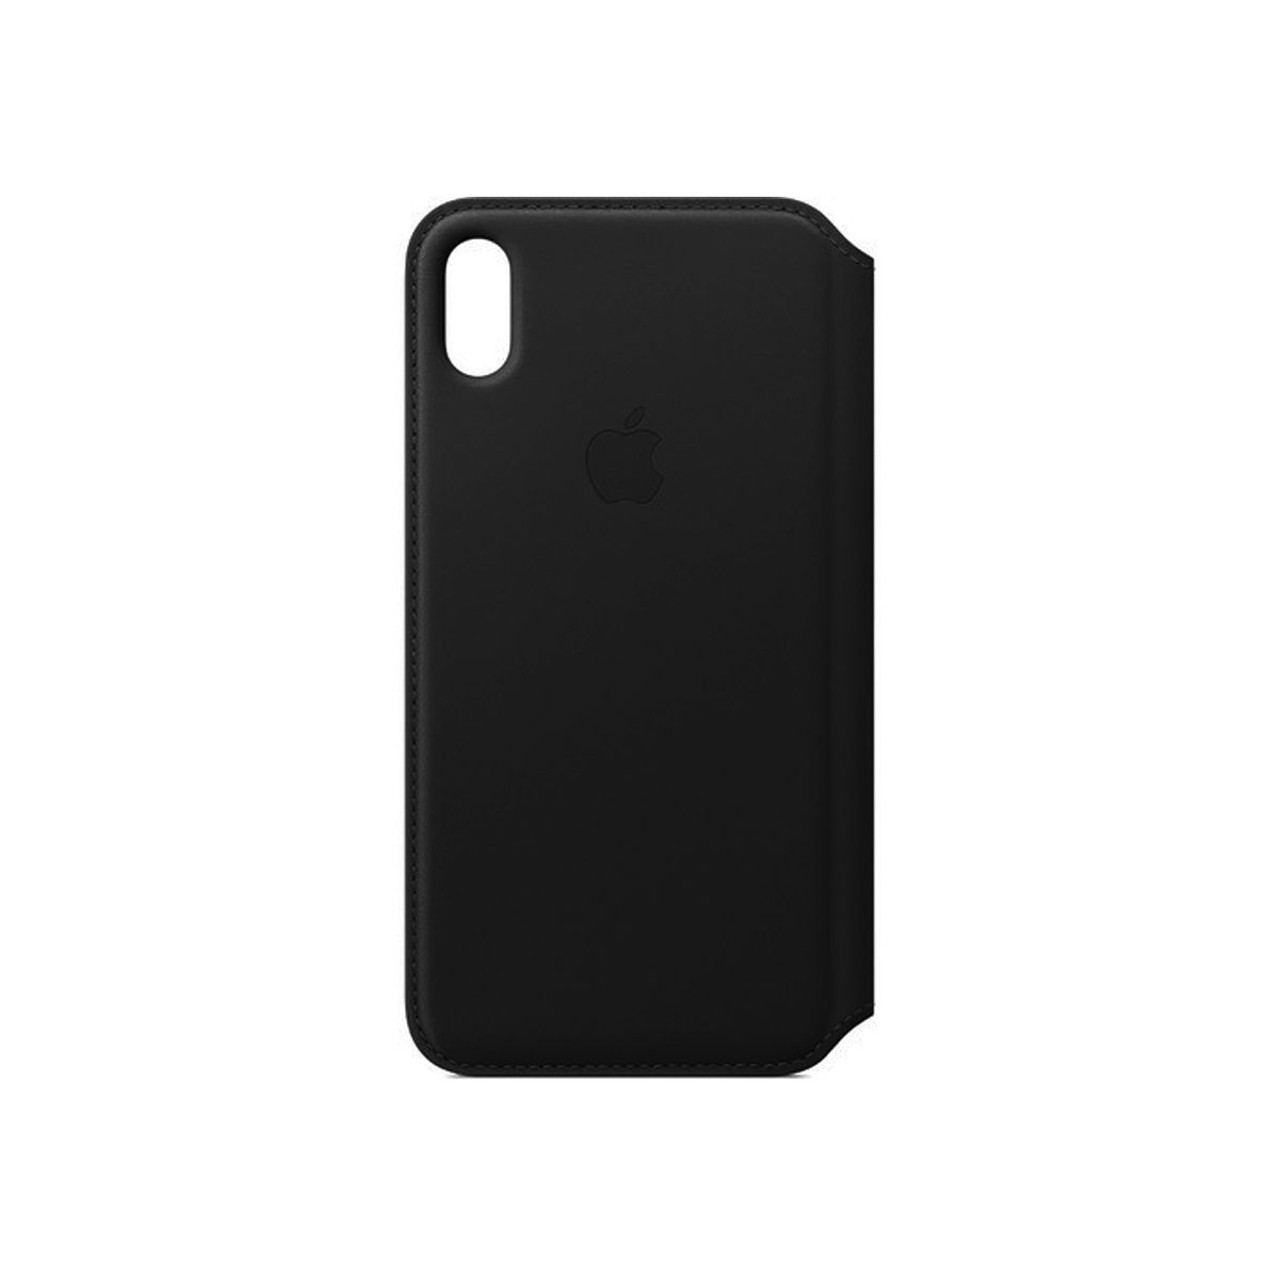 Apple Leather Folio for iPhone XS Max product image